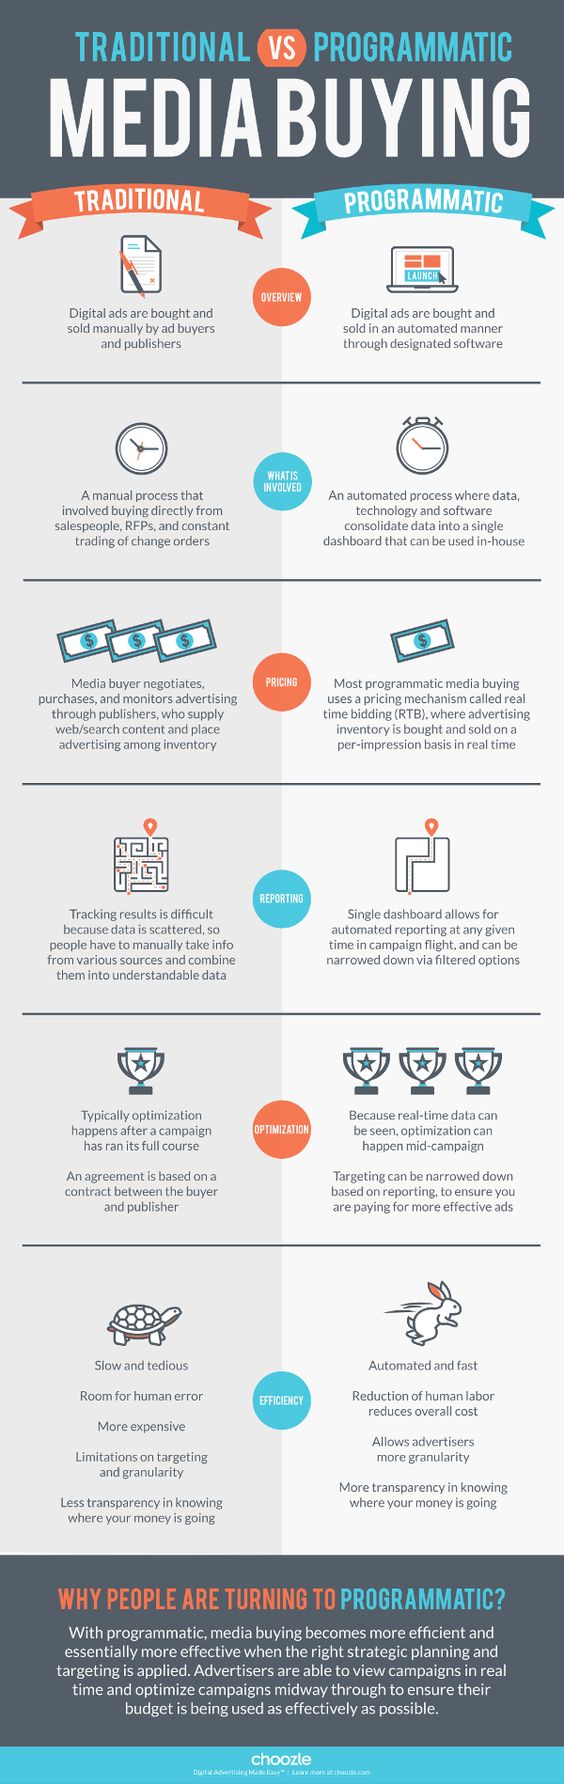 comparison infographic about traditional versus programmatic media buying